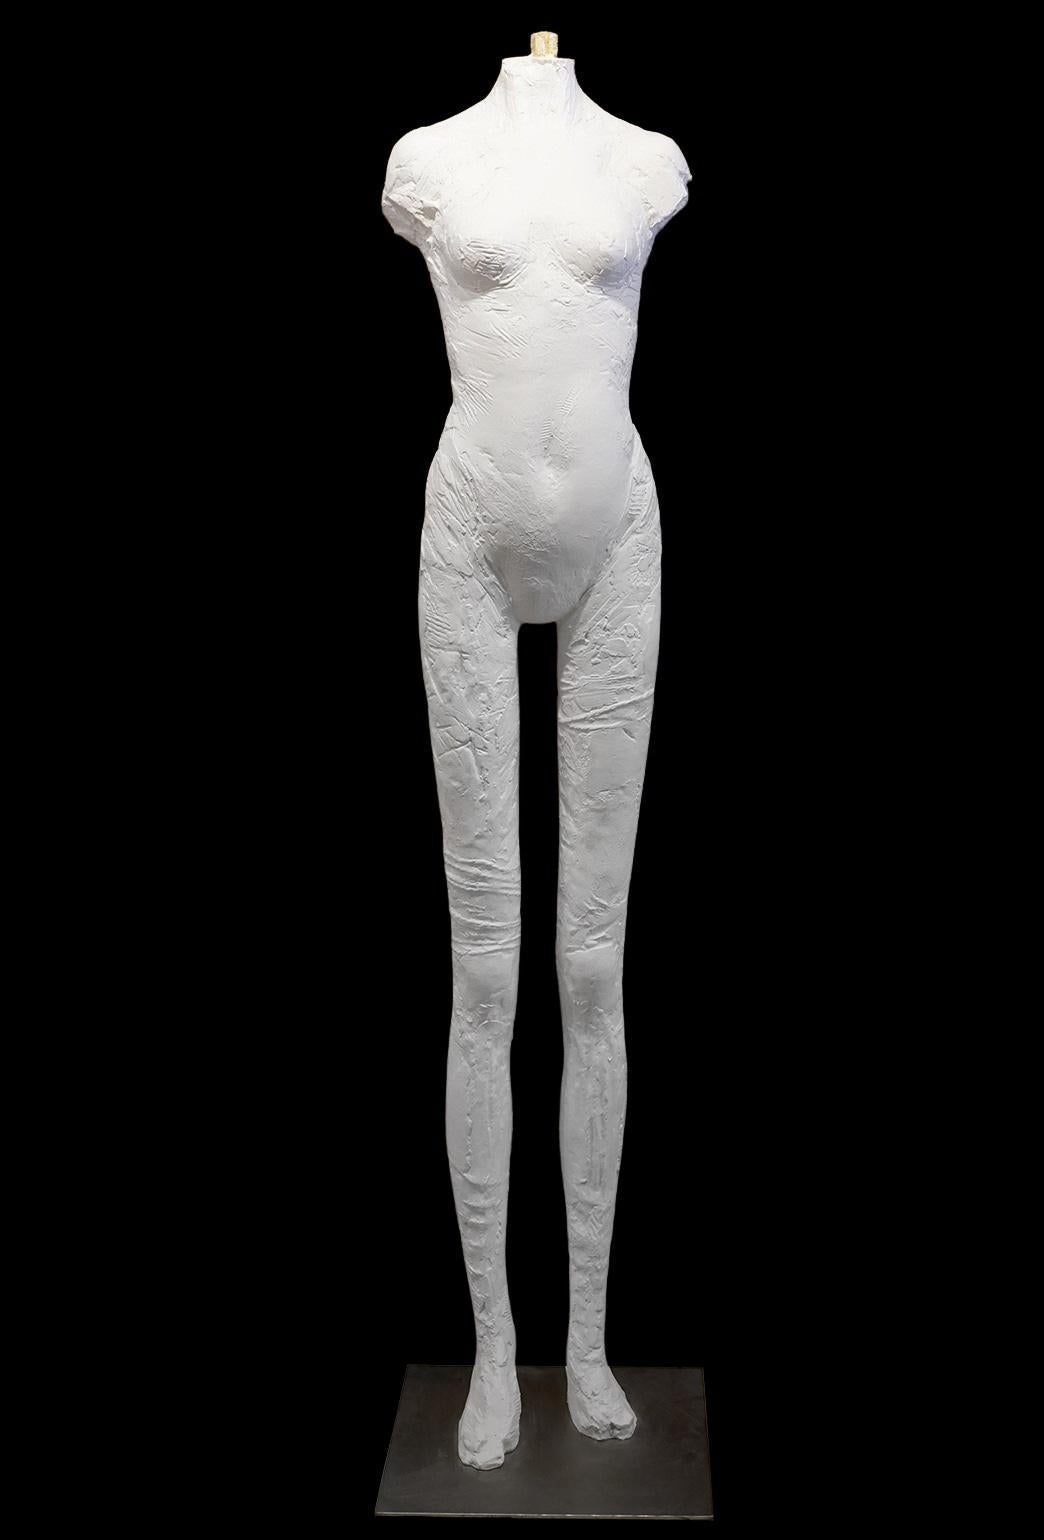 Modeled in th style of Manuel Neri (American 1930-2021) this figure with exaggerated long legs is in some ways reminiscent of works by Giacometti. Standing 7 feet tall the sculpture adds a new dimension to its Surroundings giving the viewer a sense